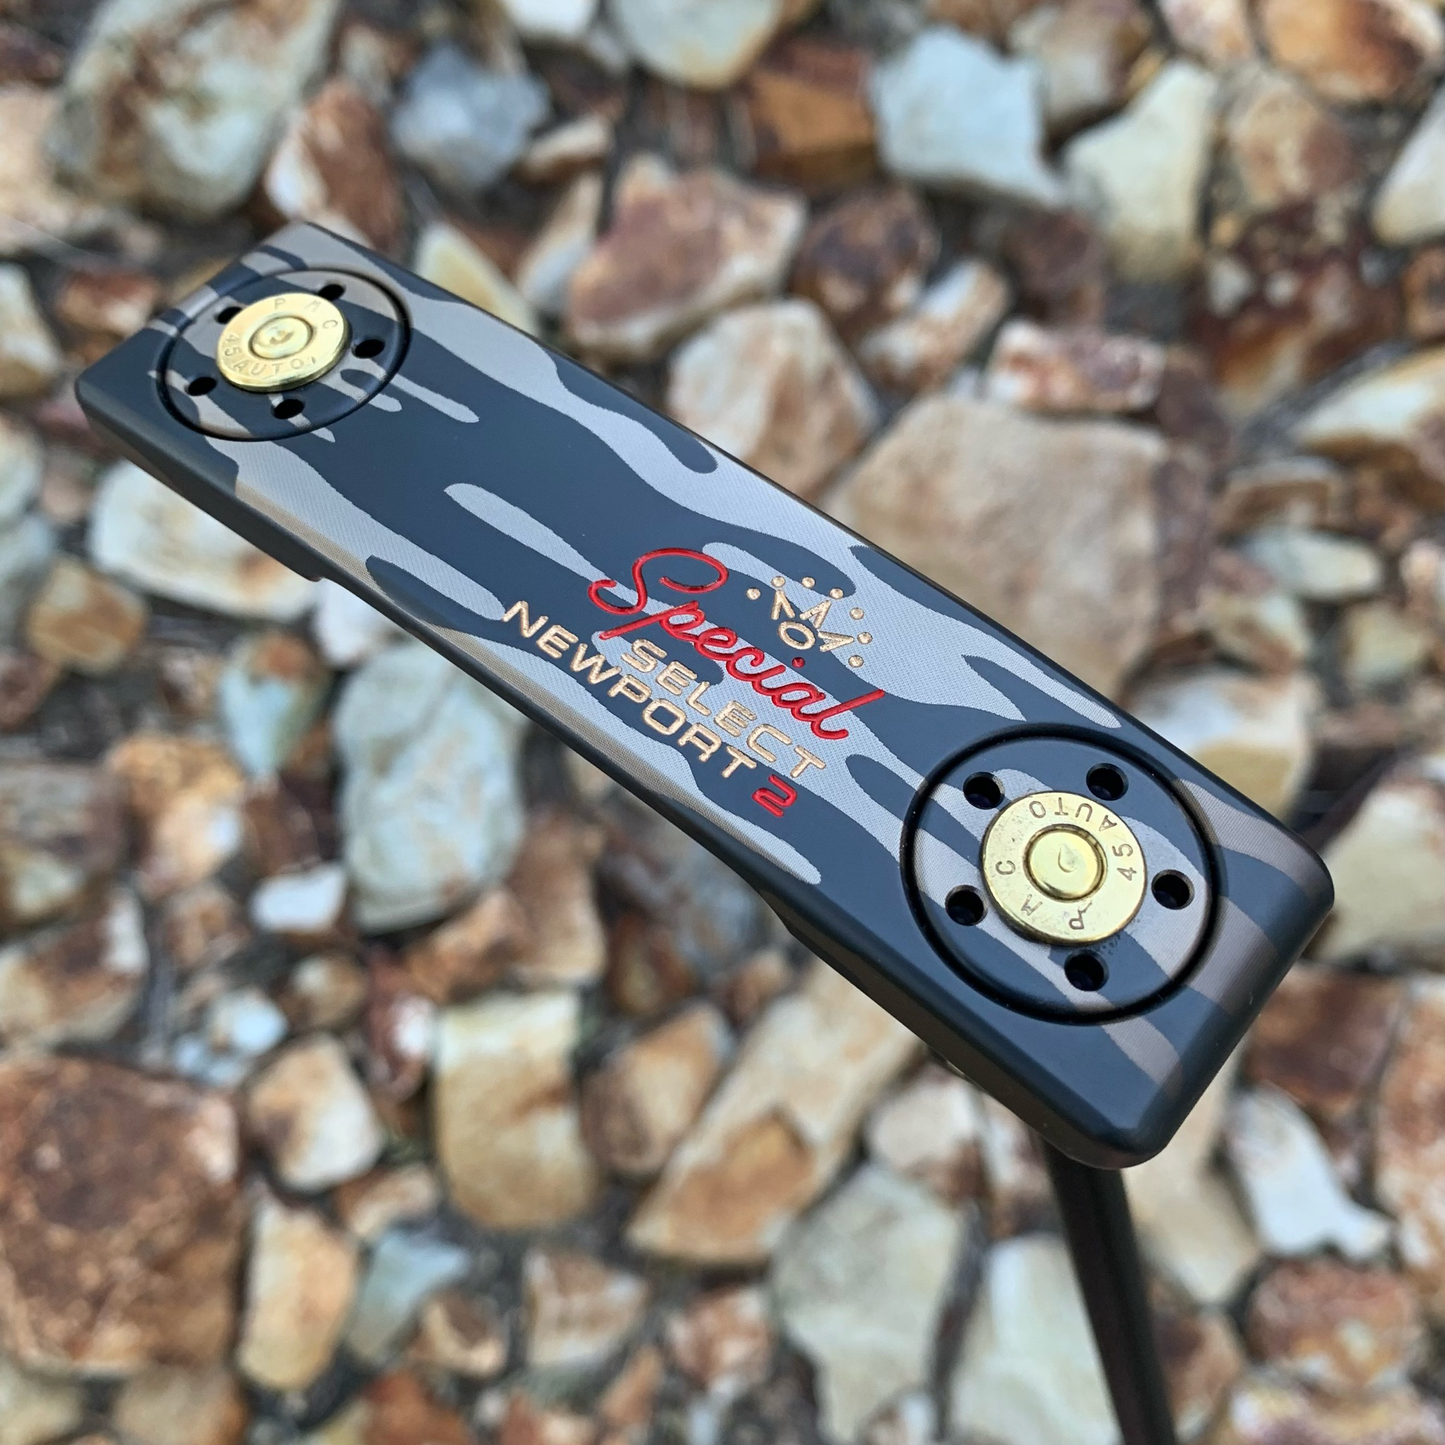 Equipped with live bullet rim! Scotty Cameron 33.5 inch putter black PVD + laser etched camouflage finish